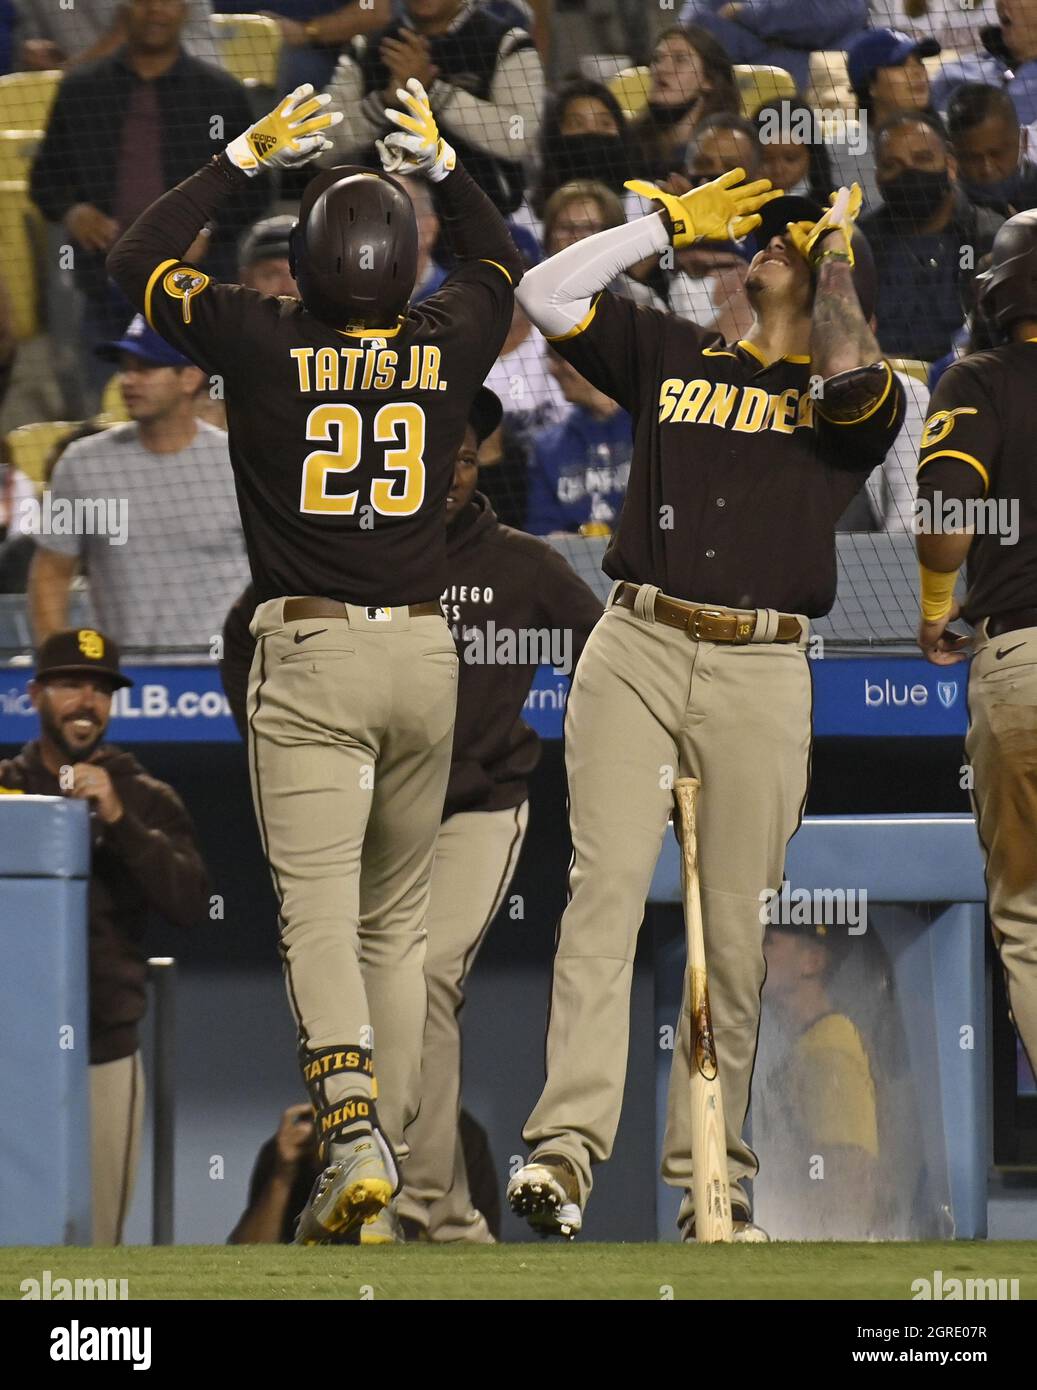 Los Angeles, USA. 01st Oct, 2021. San Diego Padres' Fernando Tatis Jr. (23) celebrates with teammate Manny Machado (R) after hitting a 457-foot, two-run blast off Los Angeles Dodgers' starting pitcher Tony Gonsolin during the fifth inning at Dodger Stadium in Los Angeles on Thursday, September 30, 2021. The blast bounced off the top of the roof over the left field pavilion and out of the stadium. It was Tatis' NL-leading 42nd and seventh at Dodger Stadium this season. Photo by Jim Ruymen/UPI Credit: UPI/Alamy Live News Stock Photo